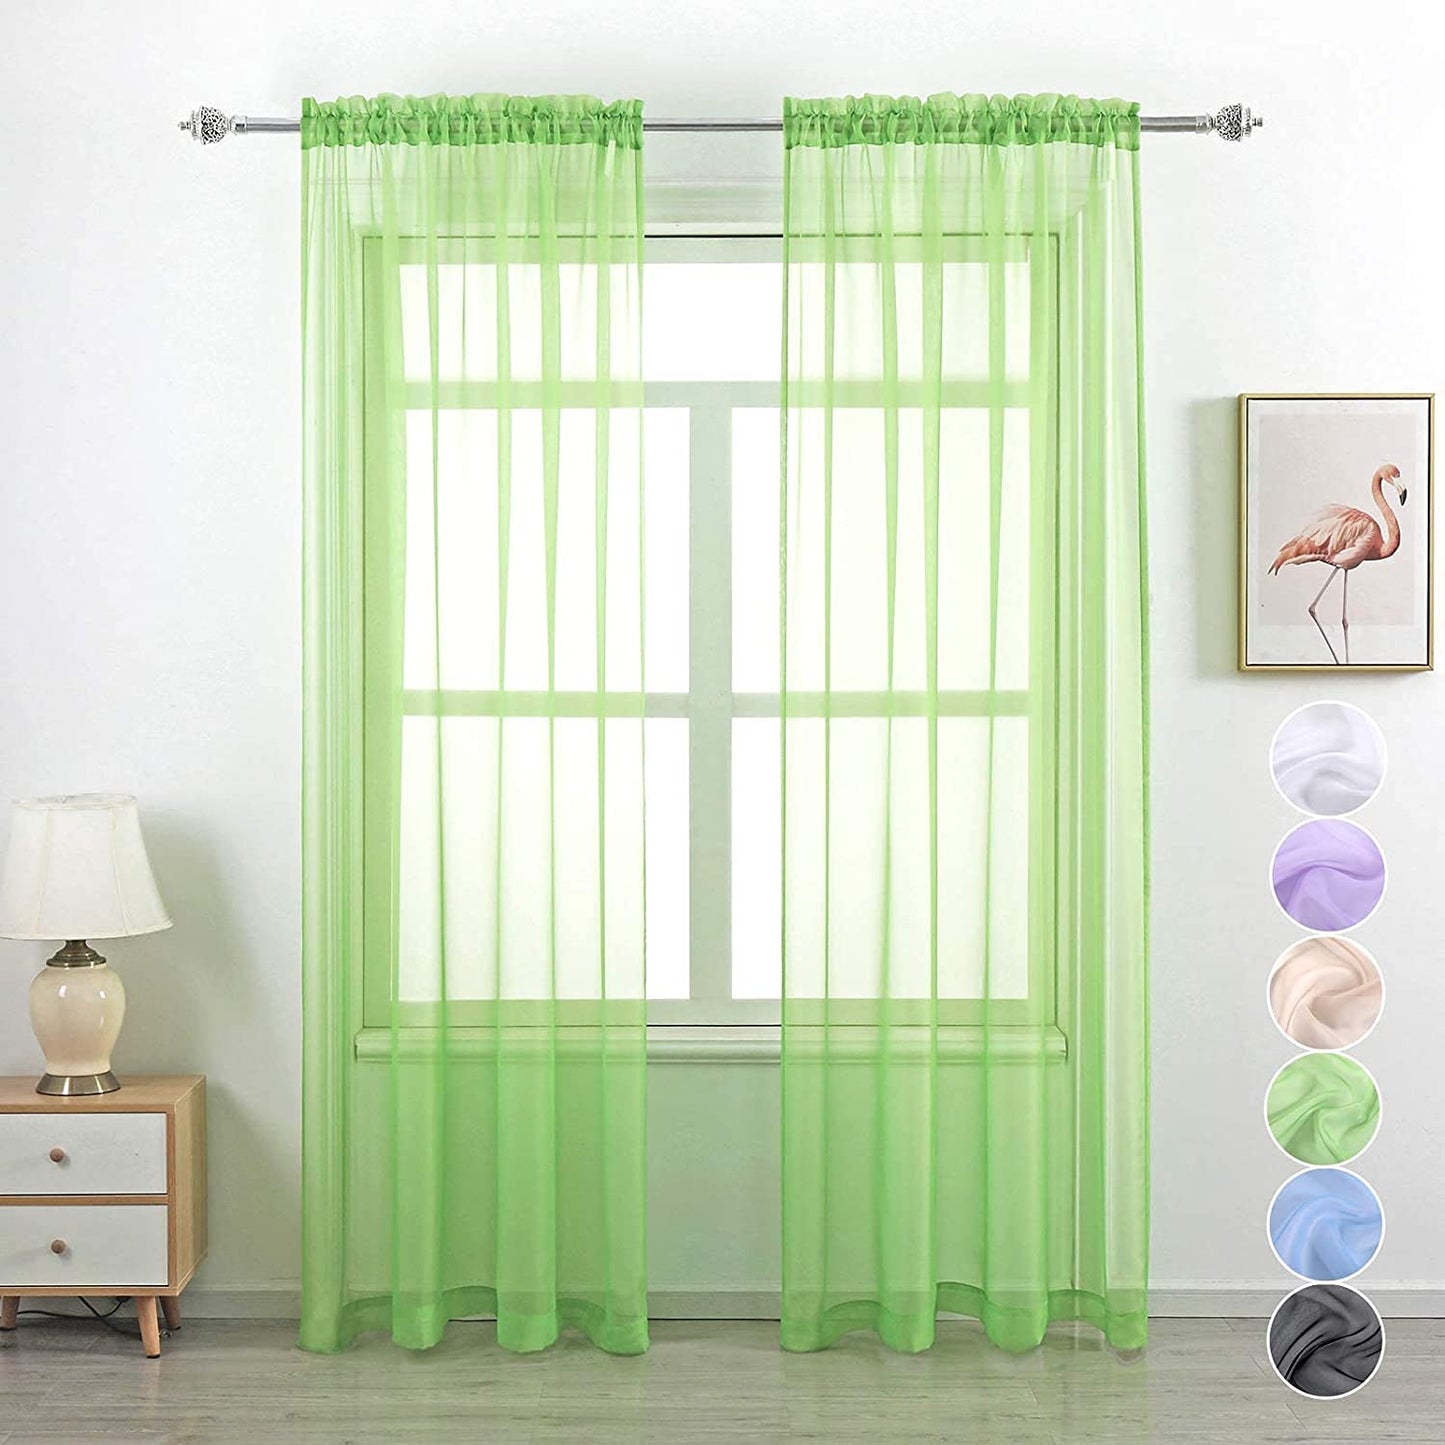 Rod Pocket Sheer Voile Curtain, Sunlight Filtering Protect Privacy Sheer for Bedroom Patio Door Set of 2 Panels